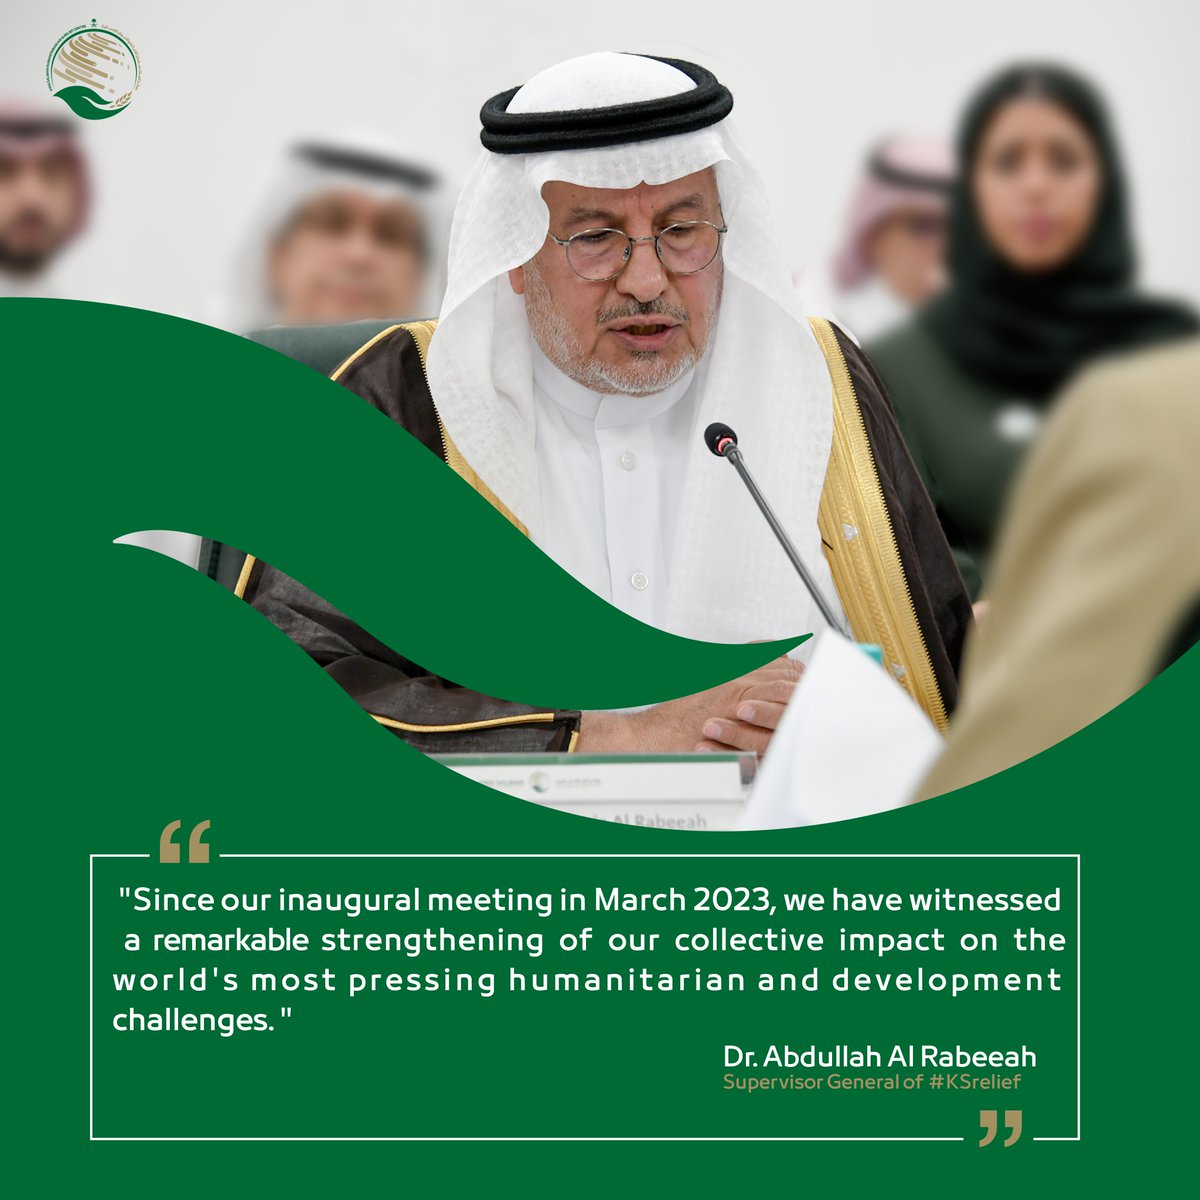 Dr. Abdullah Al Rabeeah, the Supervisor General of #KSrelief, in the high-level segment of the Second Strategic Dialogue for Development and Humanitarian Aid between Saudi Arabia and United Kingdom in Riyadh